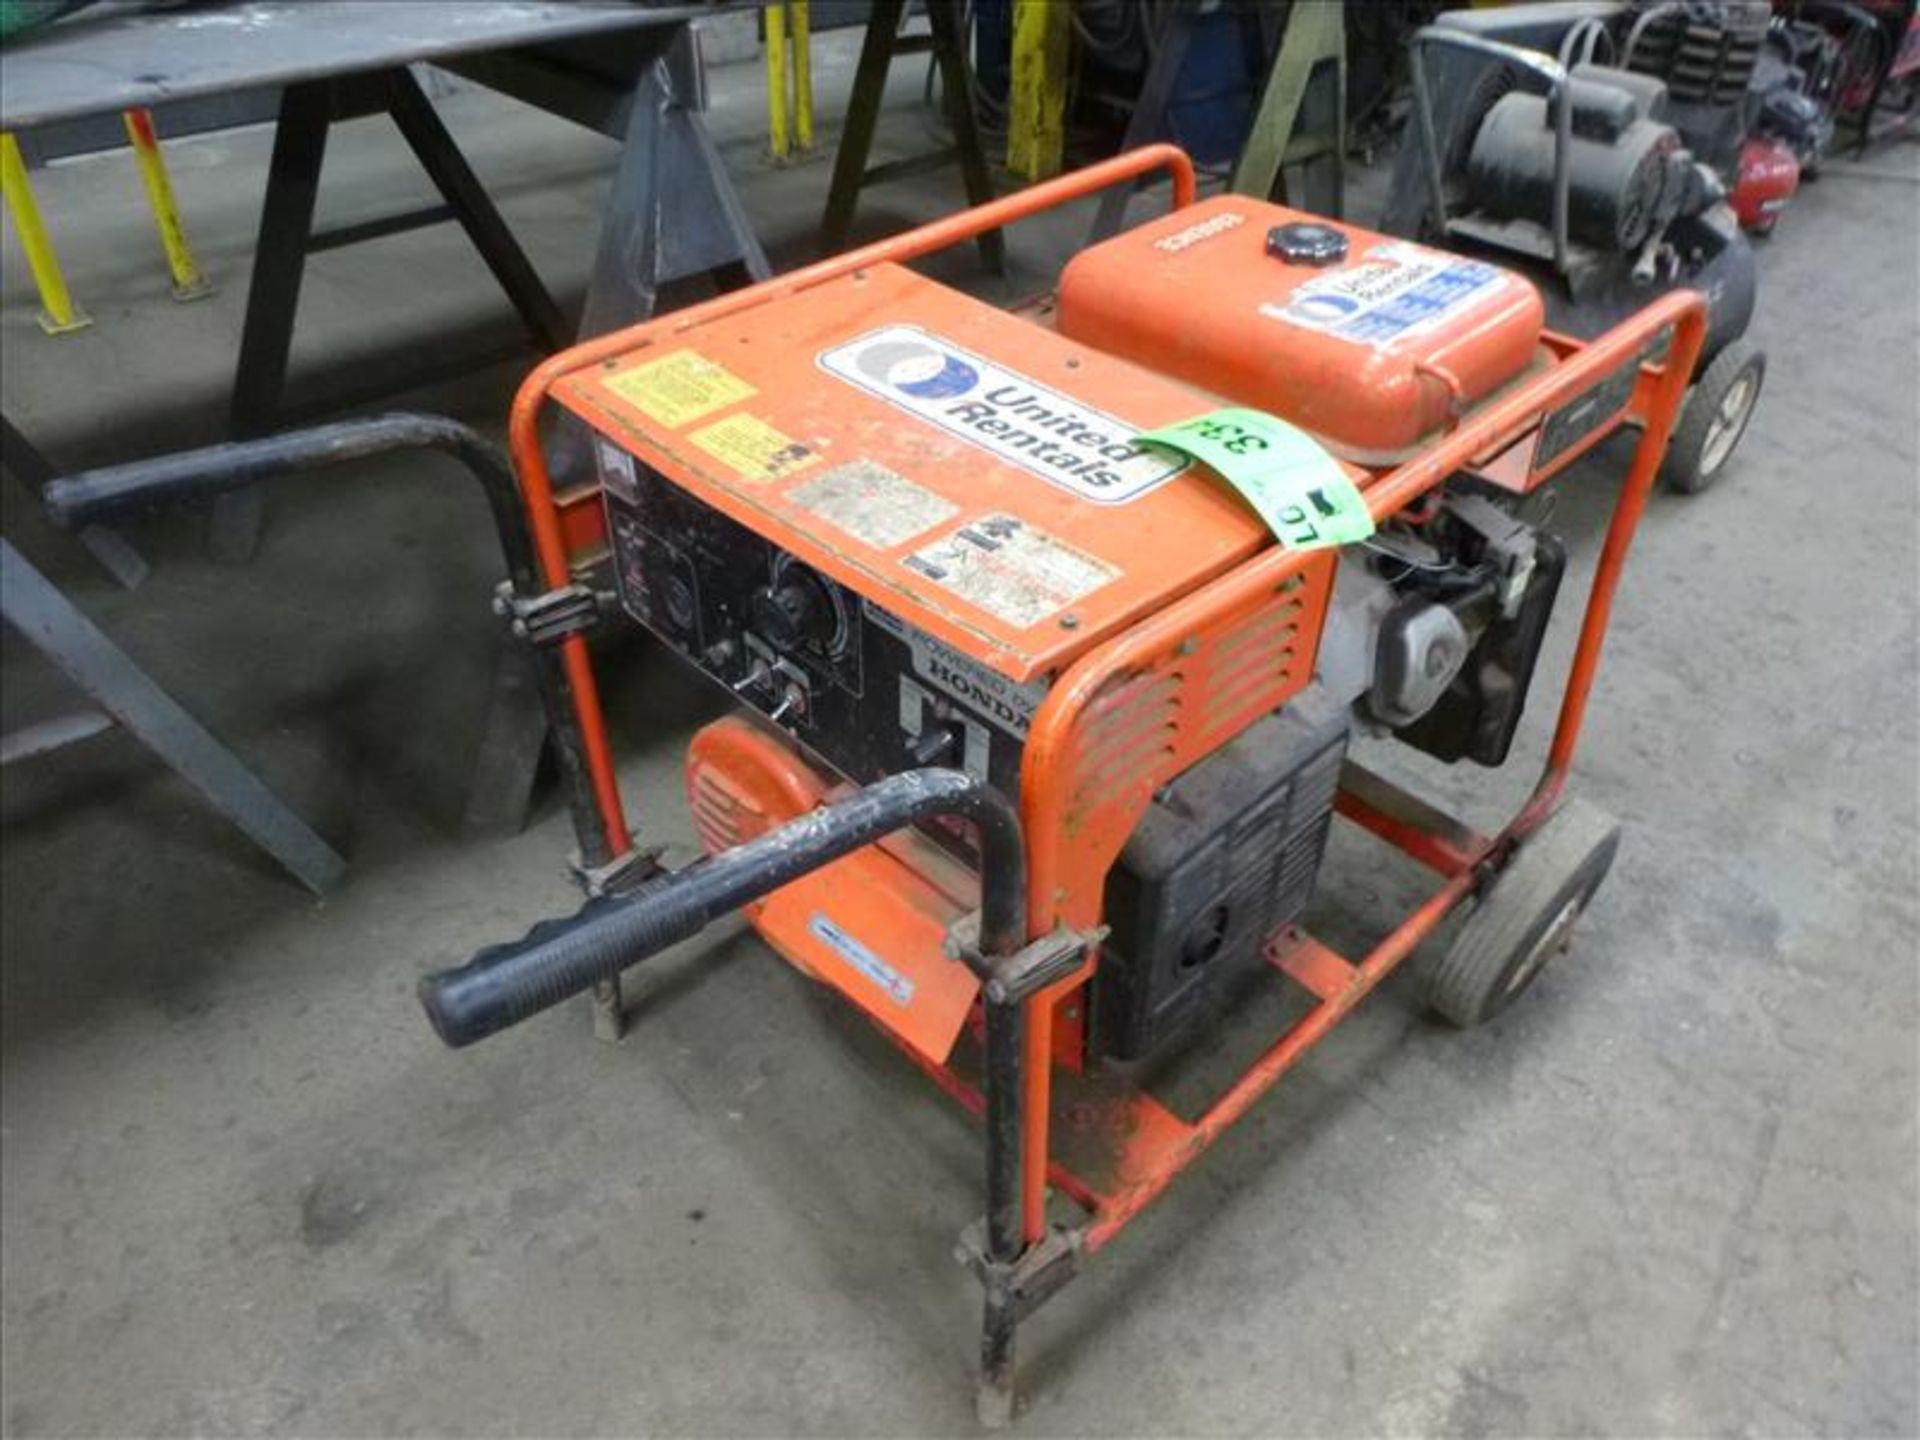 MultiQuip portable generator, mod. GLW-180H w/ 11 hp Honda gas eng. (located at 164 Rue Strathcona)